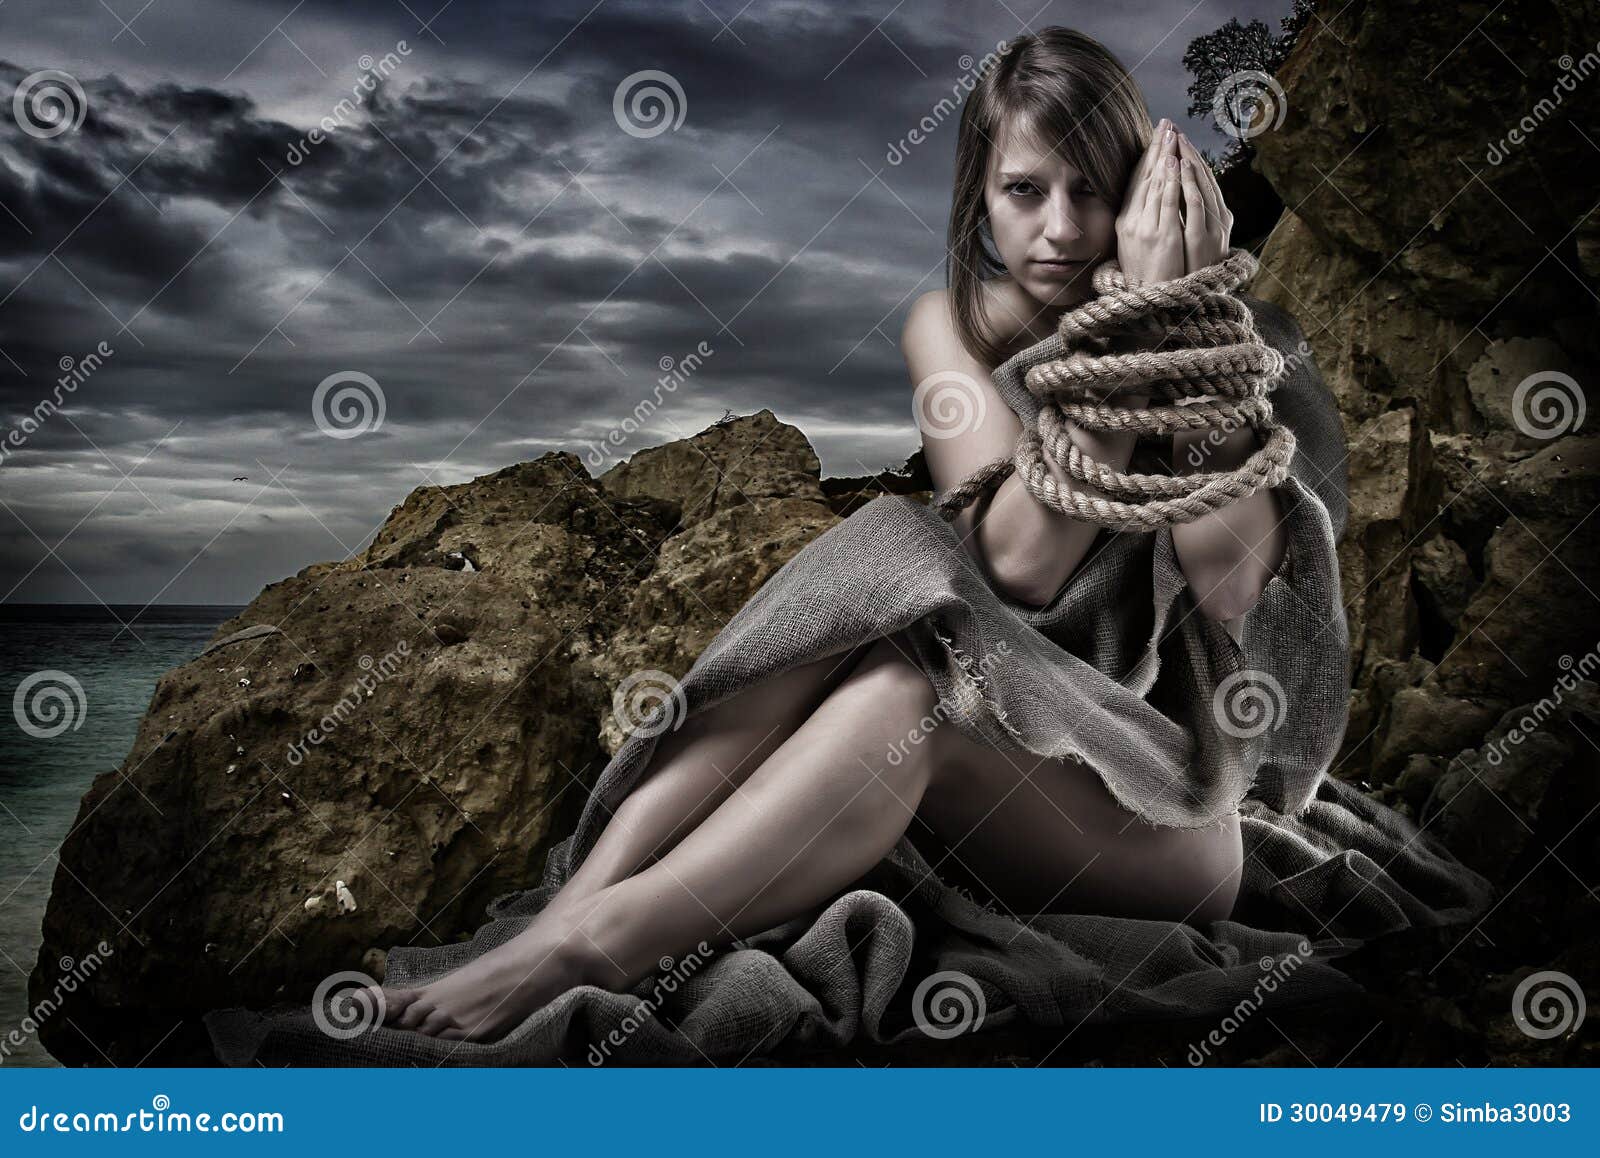 Woman with tied up hands stock image. Image of eyes, canvas - 30049479